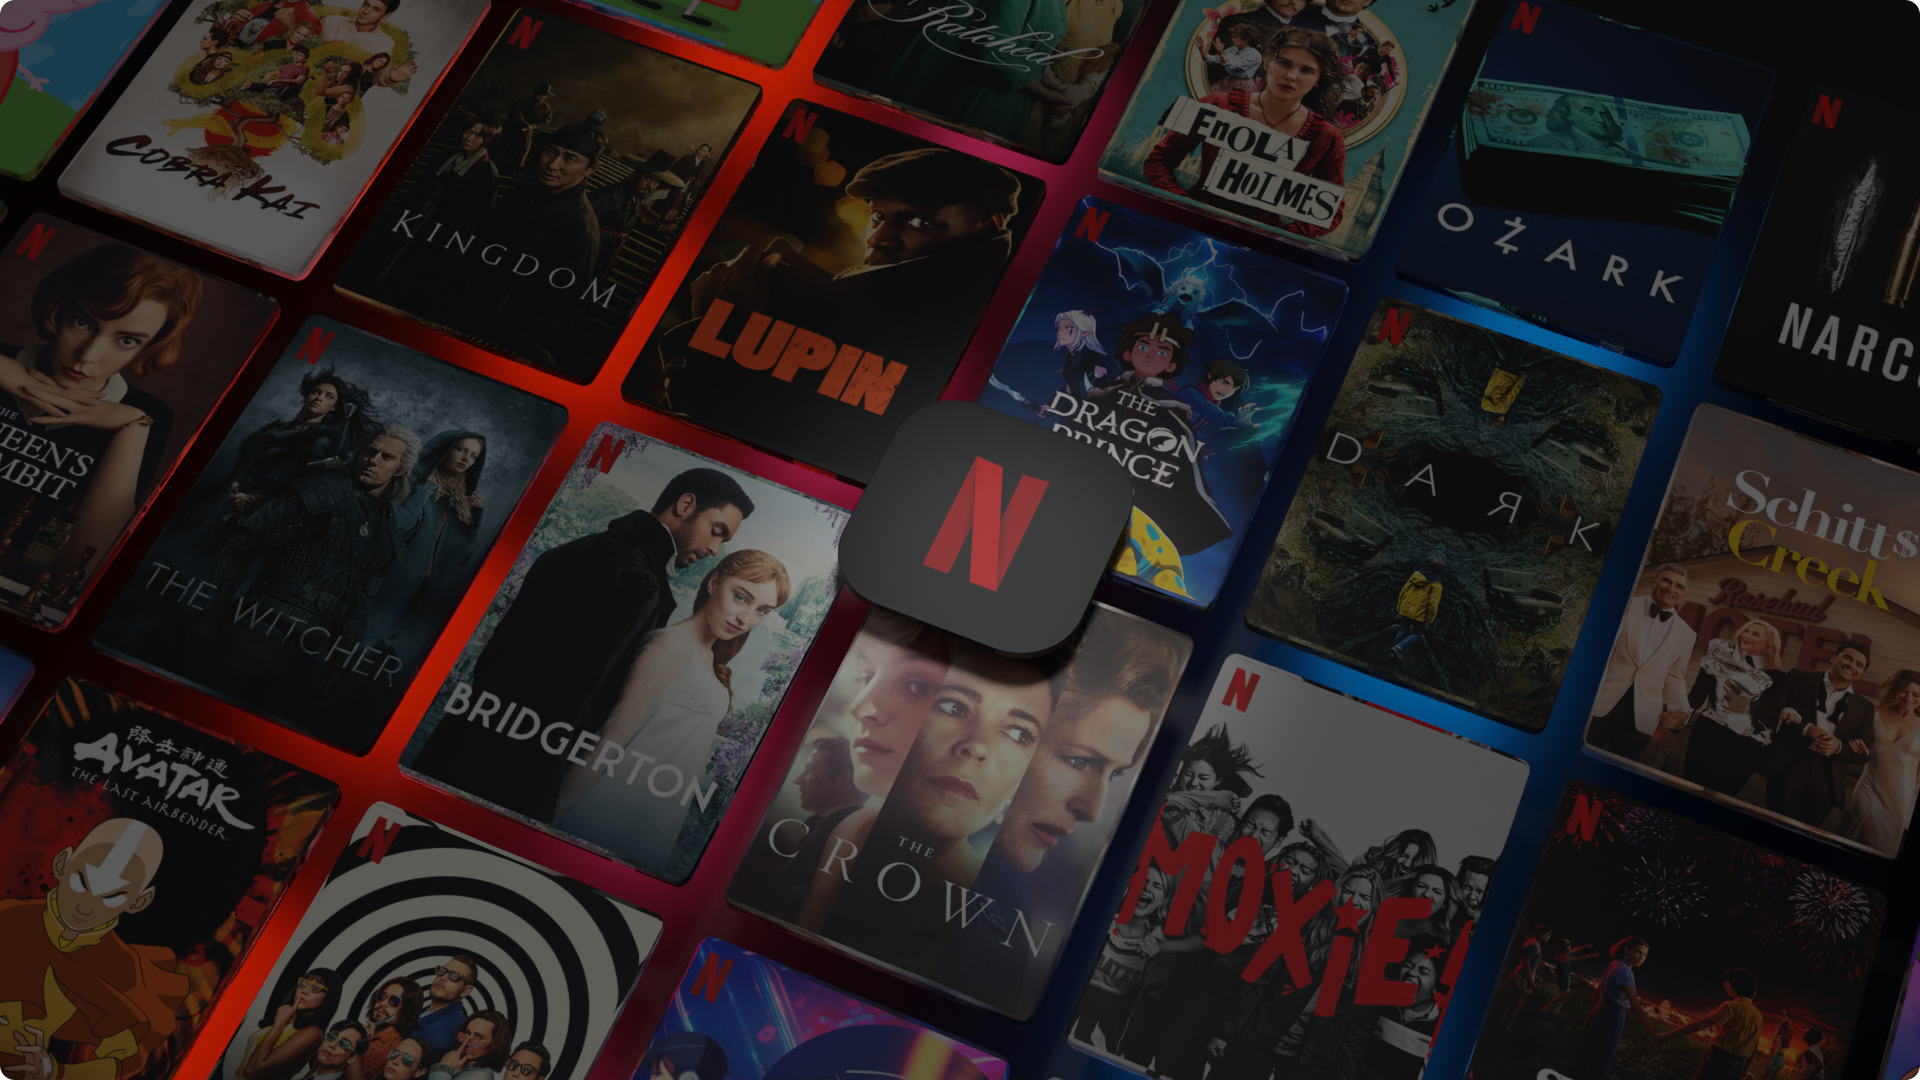 Netflix wants you to stop sharing your password with people outside the household